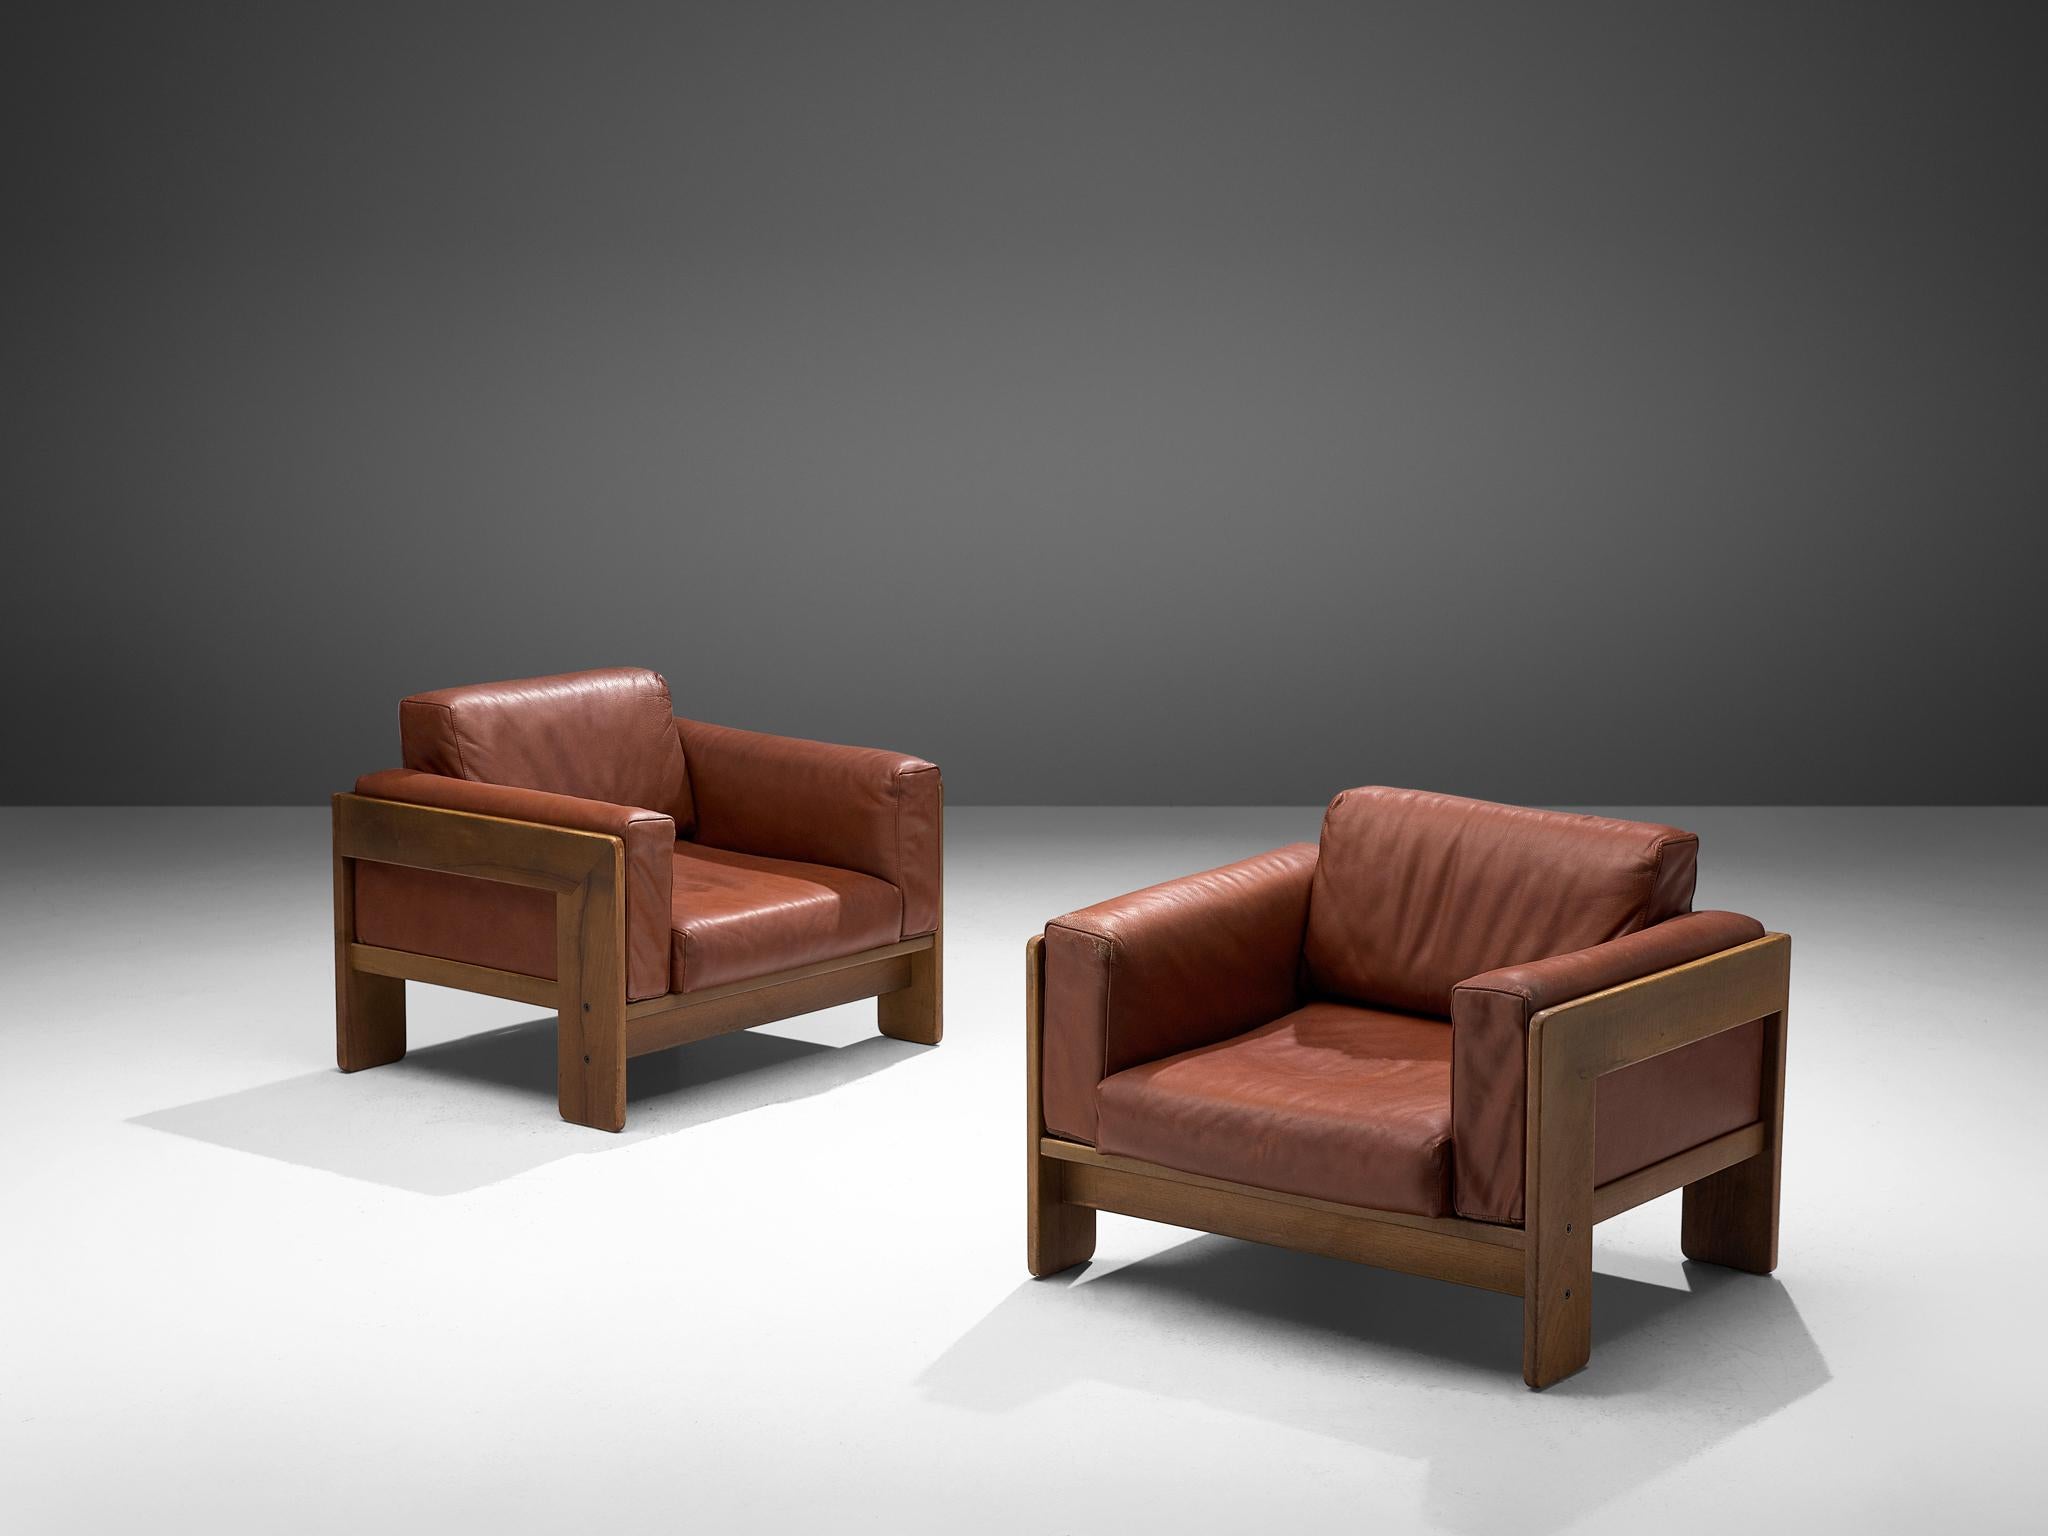 Tobia Scarpa for Knoll, pair of 'Bastiano' club chairs, leather and walnut, Italy, design 1960, manufactured in 1970s.

Beautiful pair of Bastiano club chairs made with a walnut frame and brown leather cushions. Tobia Scarpa designed the Bastiano